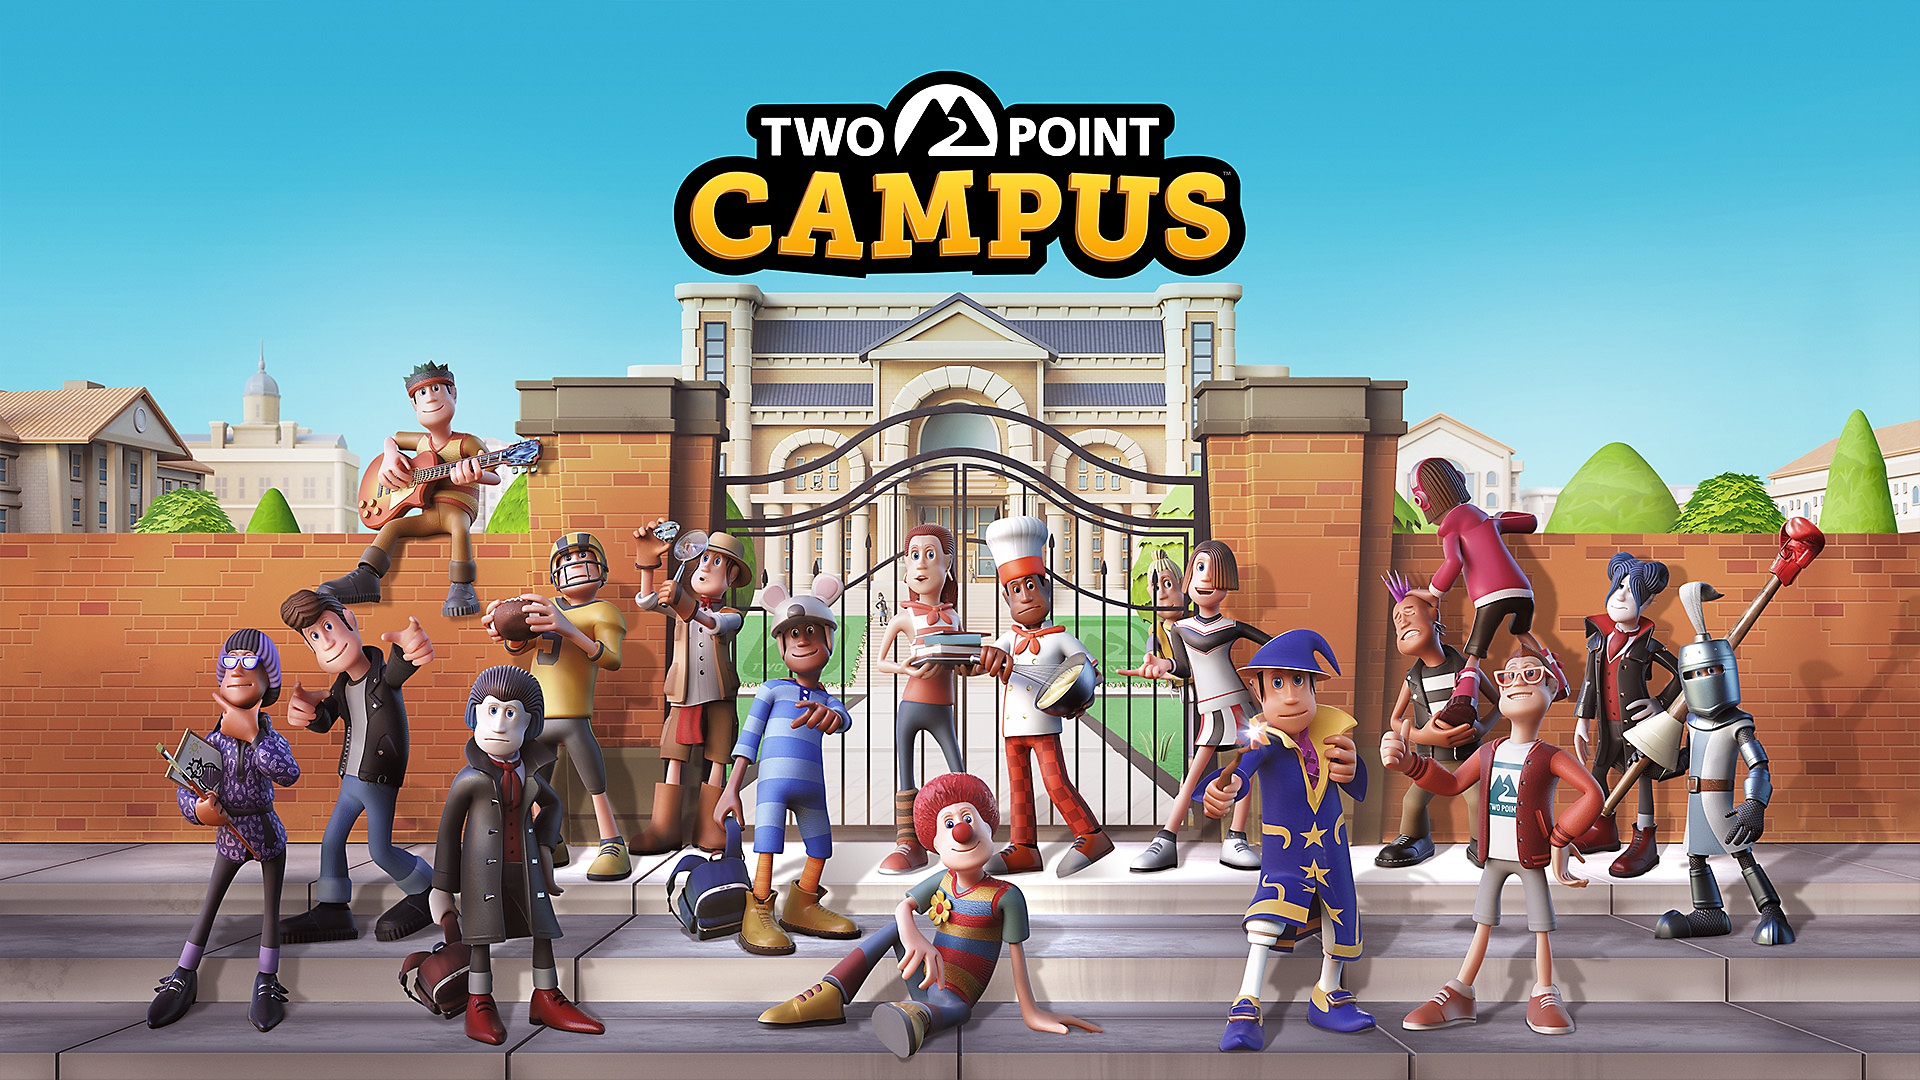 Two Point Campus - Launch Trailer | PS5 & PS4 Games